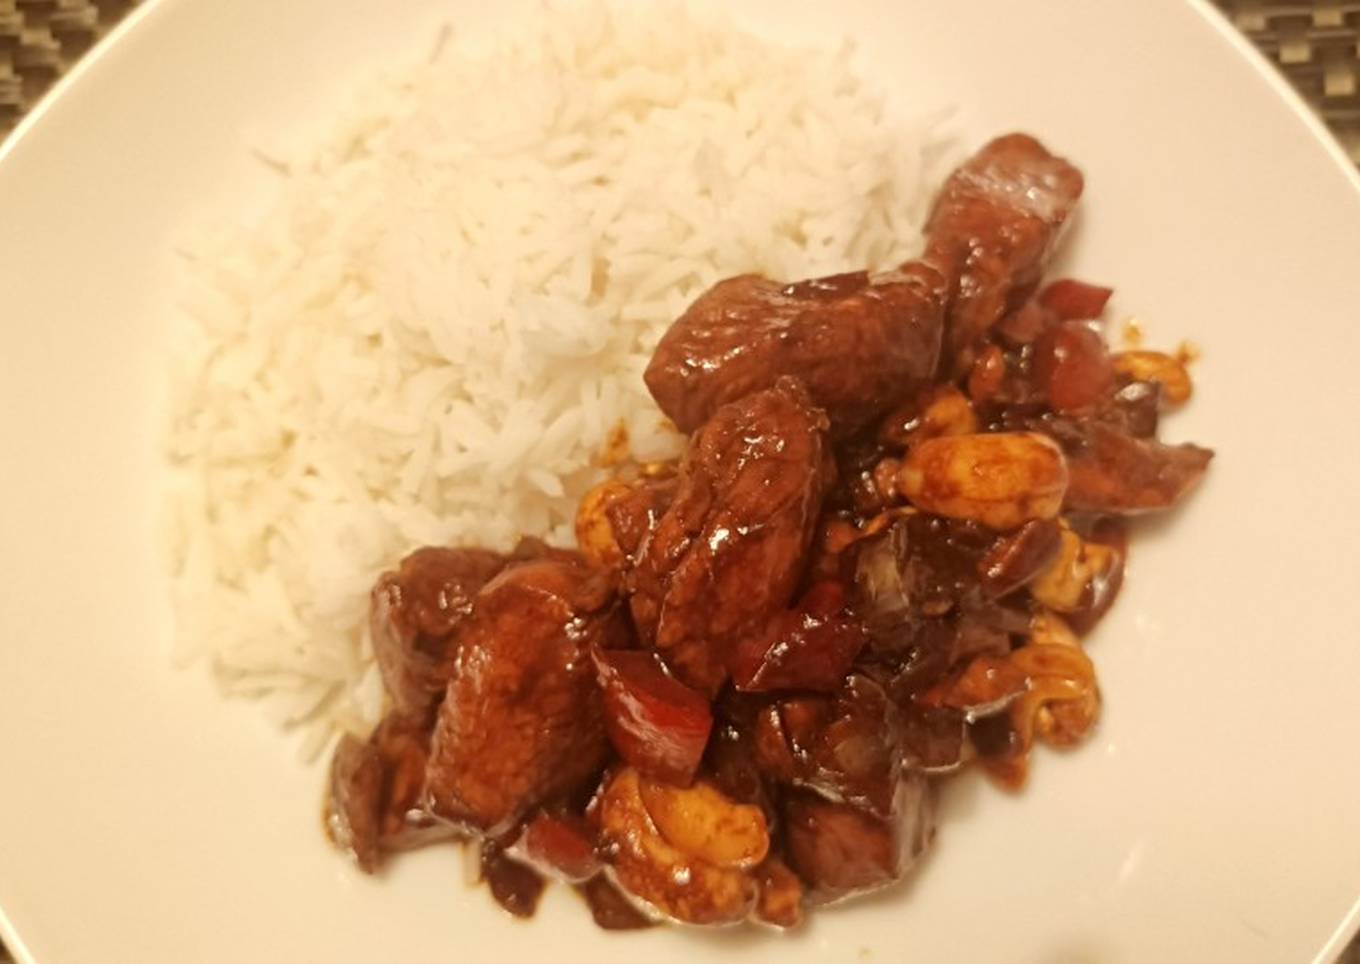 Fluffy’s attempt at Kung pao chicken